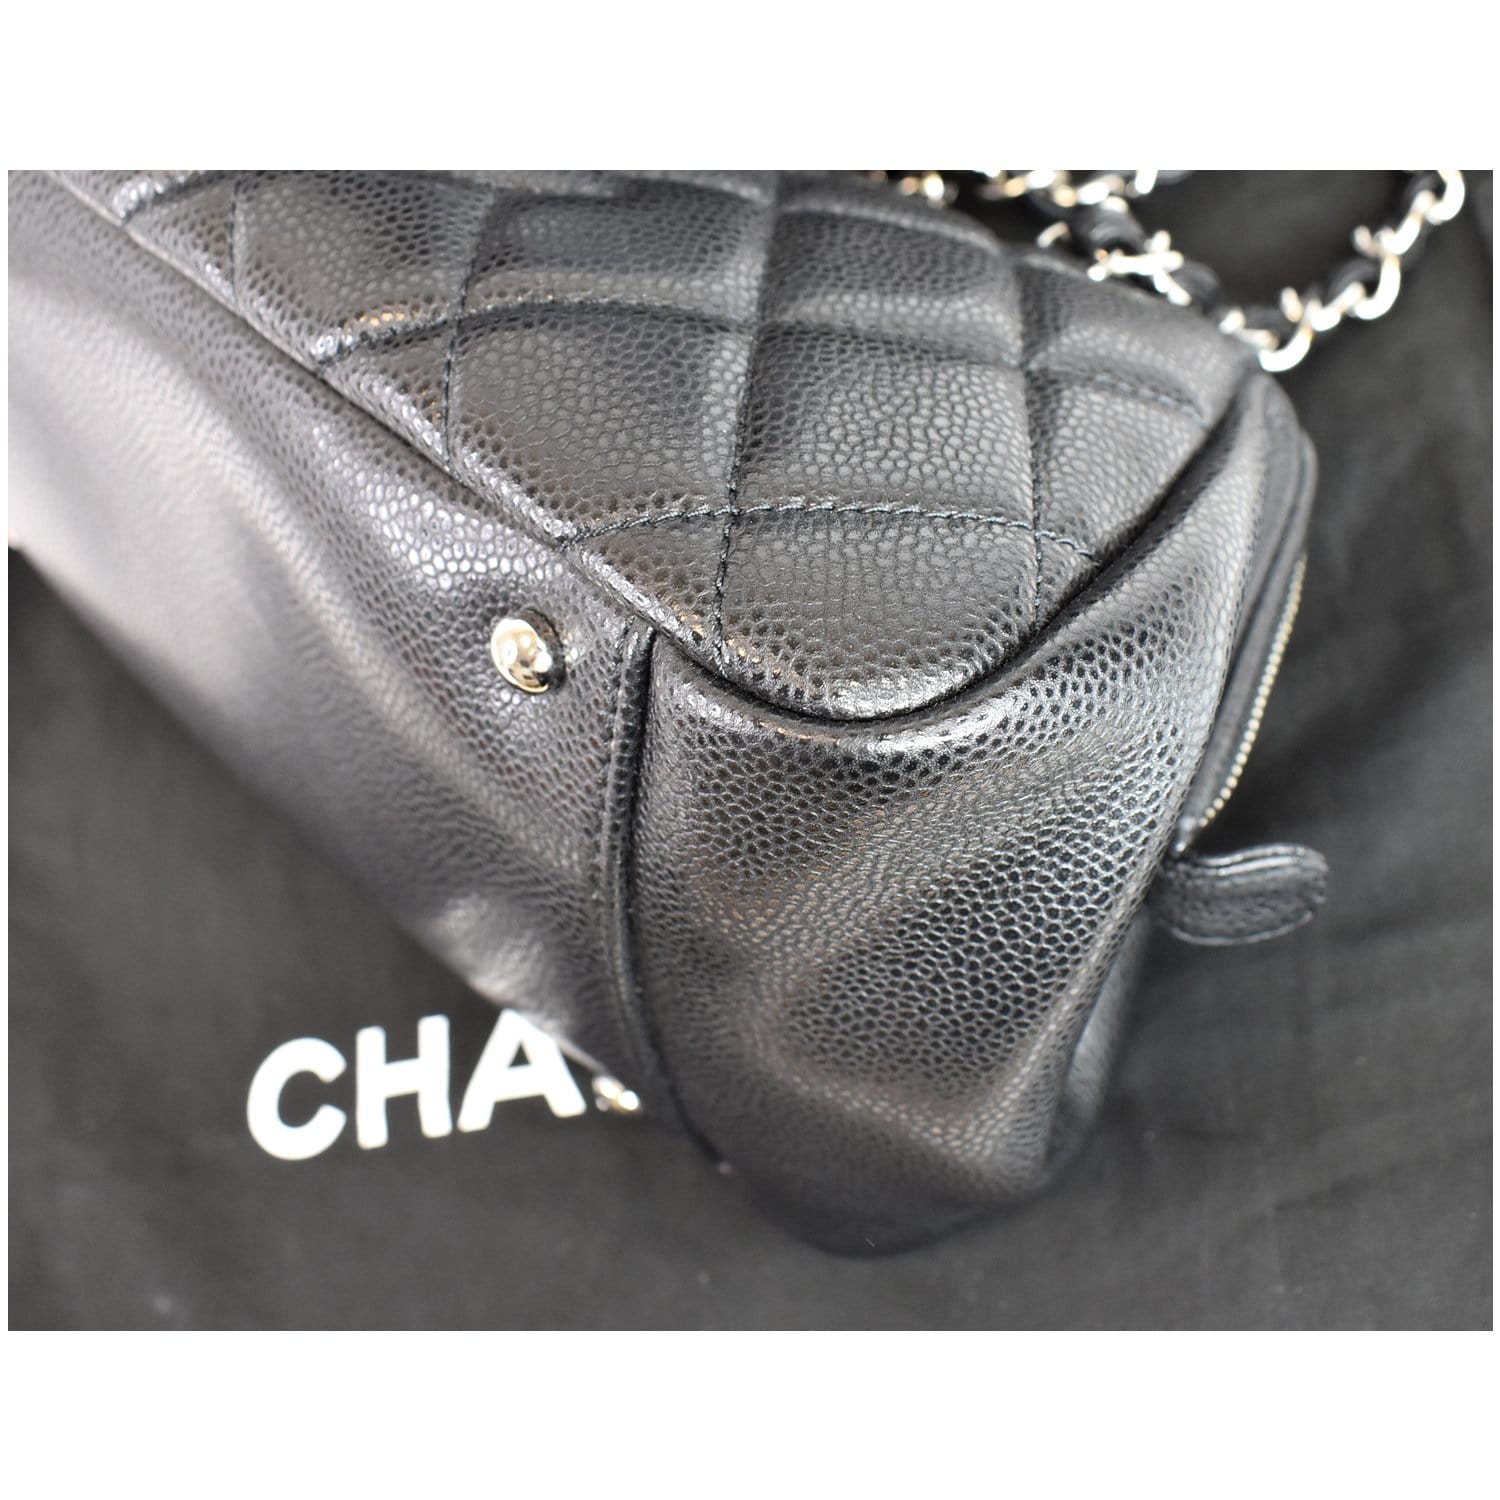 Heritage Vintage: Chanel Quilted Caviar Leather Small Bowling Bag